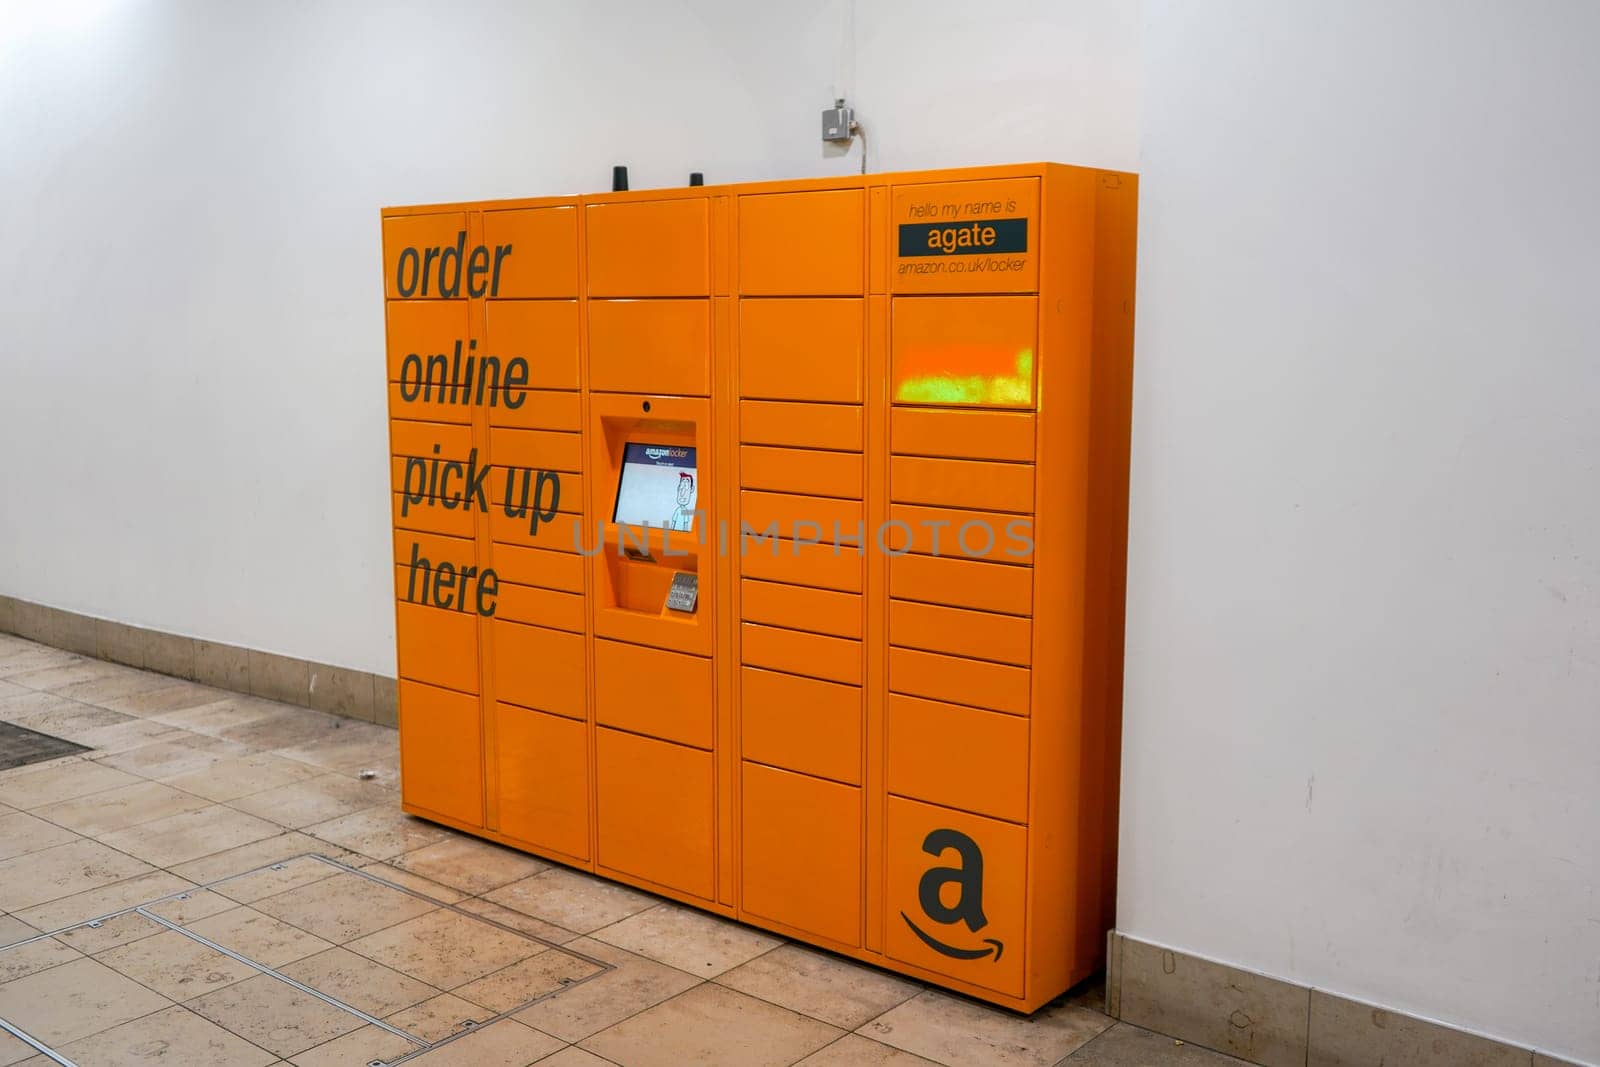 London, United Kingdom - February 03, 2019: Orange Amazon locker in Lewisham shopping centre. Service is used for pick up of orders delivered from on-line store